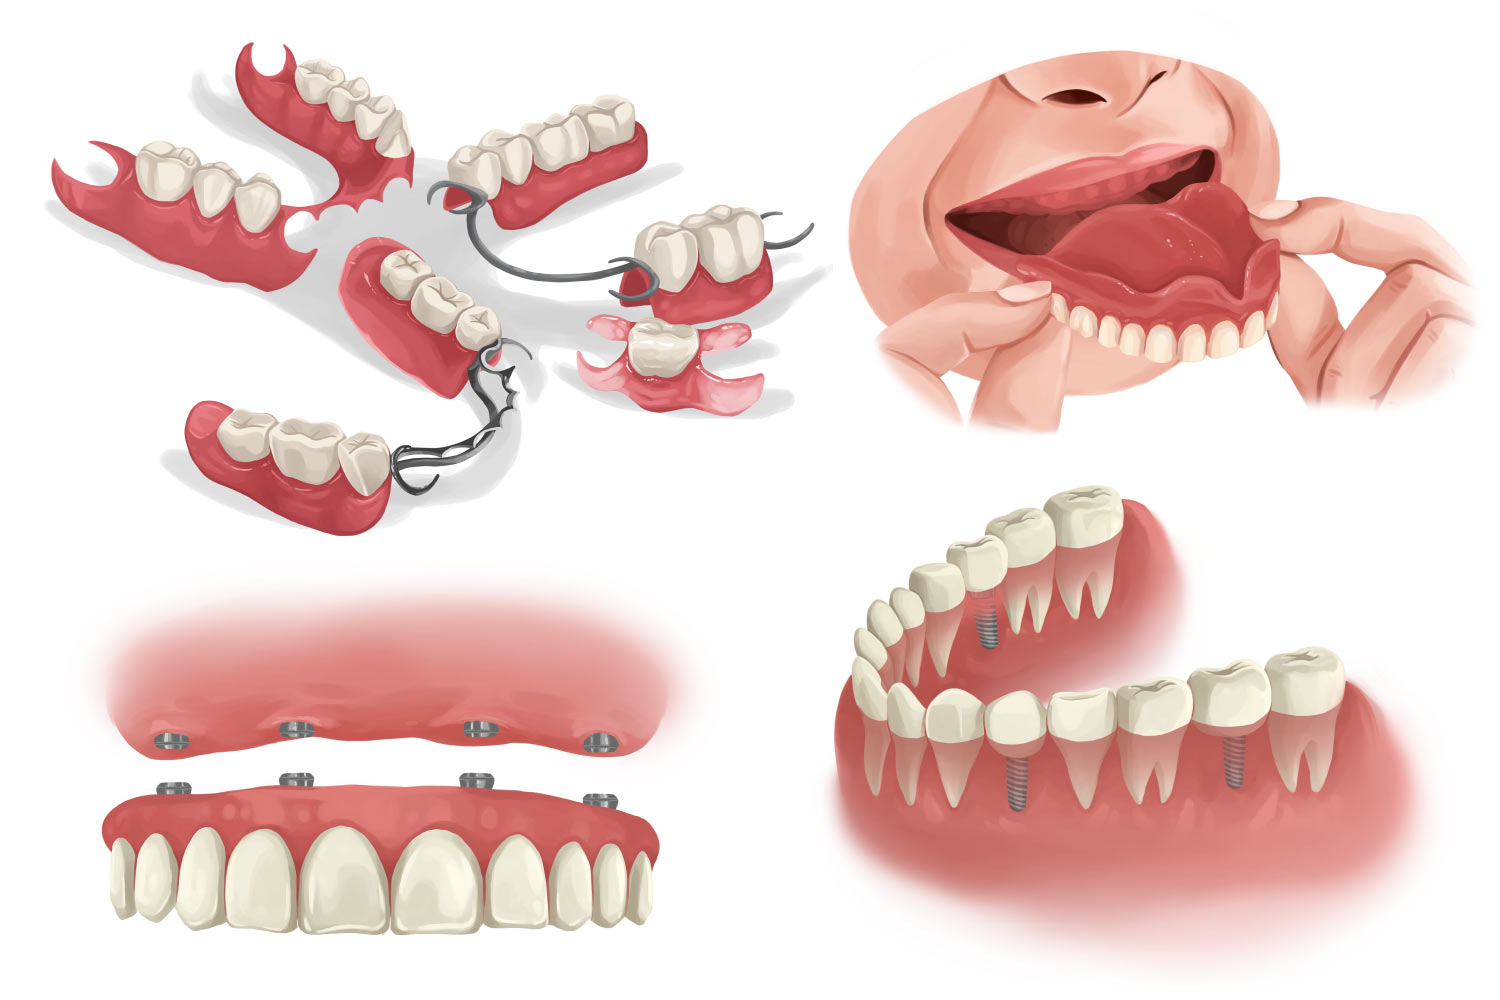 Cartoon images of partial dentures, full dentures, implant-supported dentures, and single dental implants to replace missing teeth